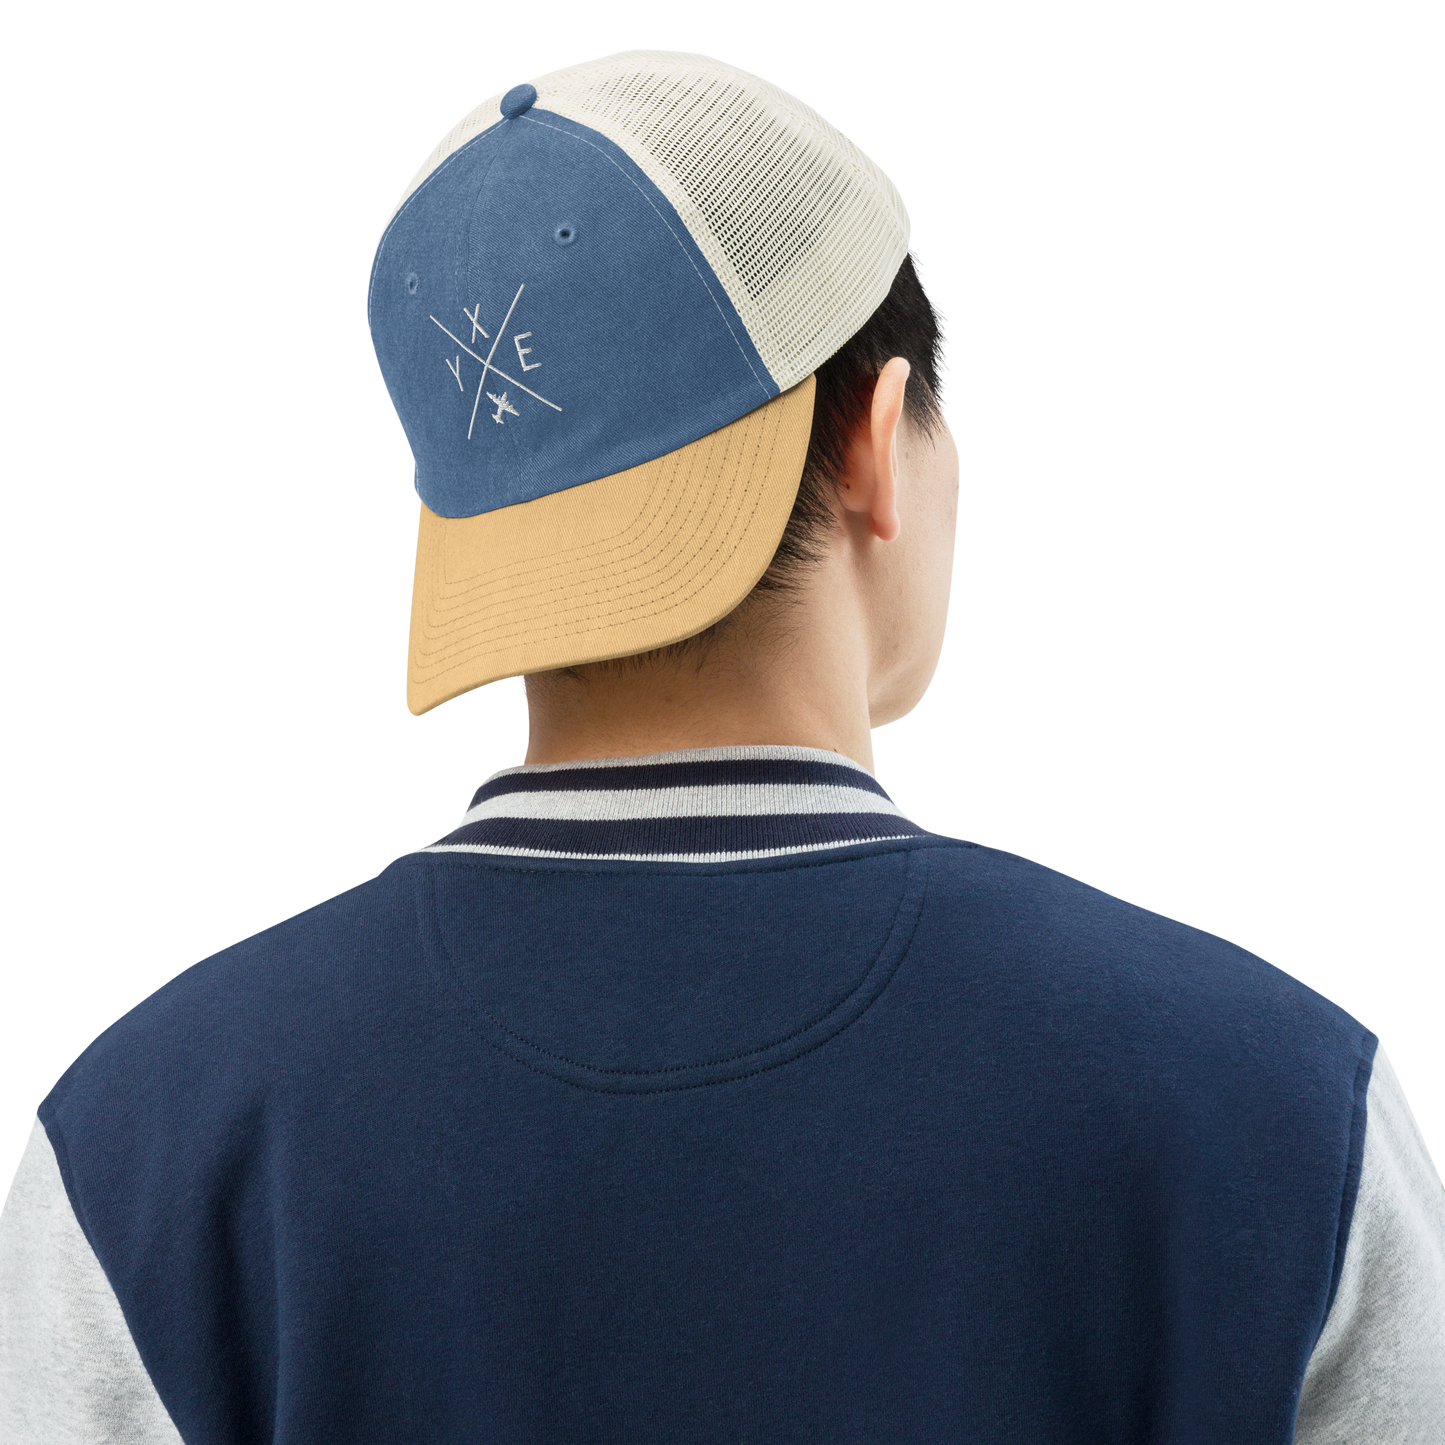 YHM Designs - YXE Saskatoon Pigment-Dyed Trucker Cap - Crossed-X Design with Airport Code and Vintage Propliner - White Embroidery - Image 04